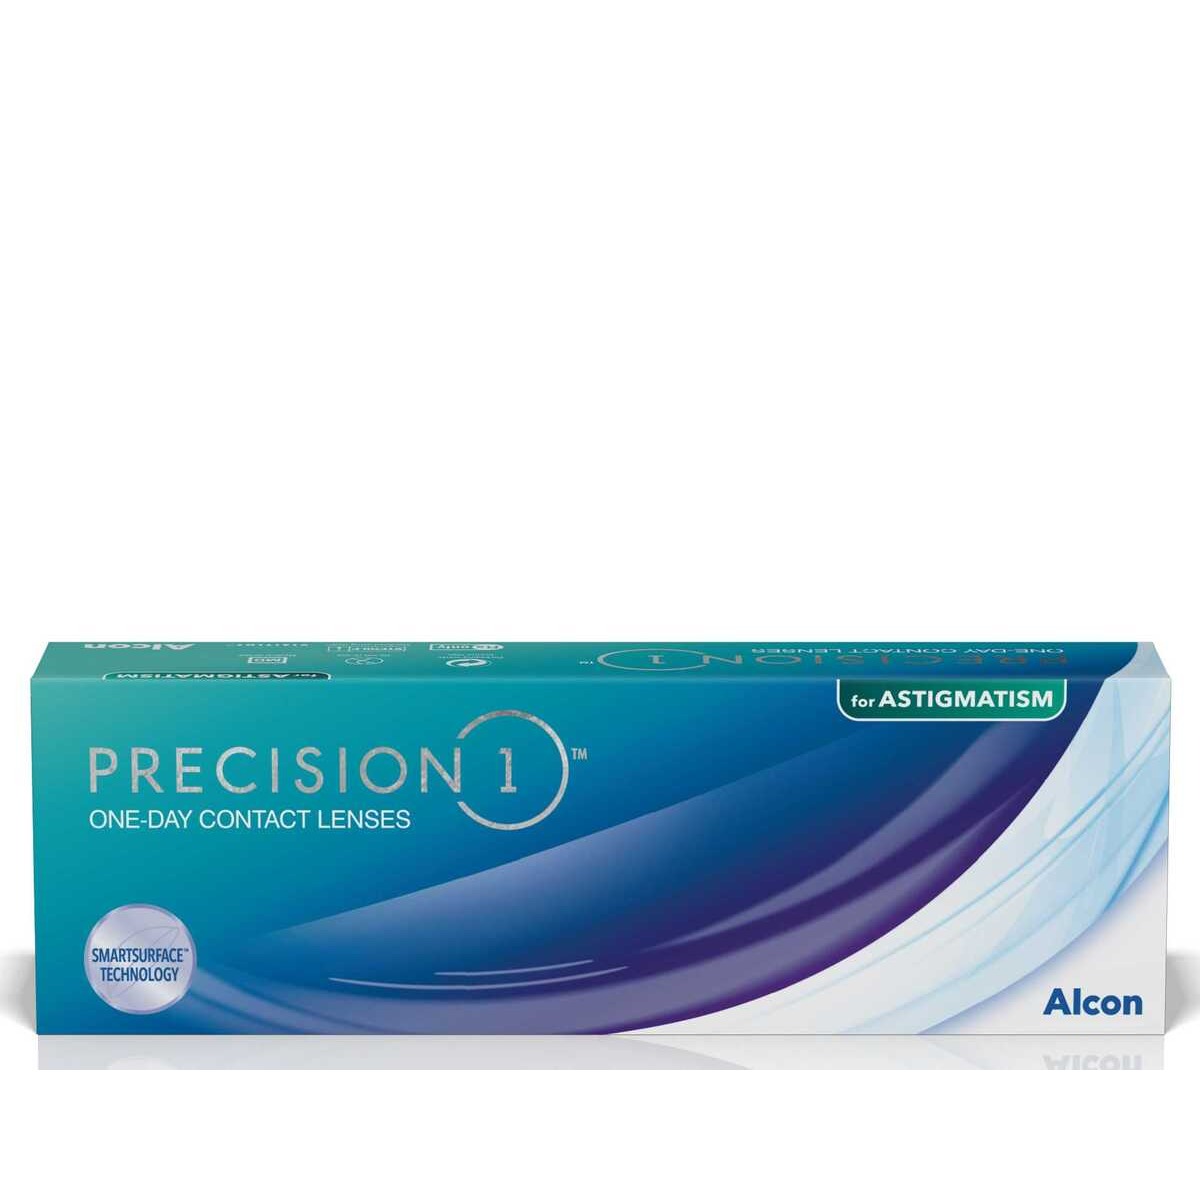 PREICISION 1 FOR ASTIGMATISM 30L